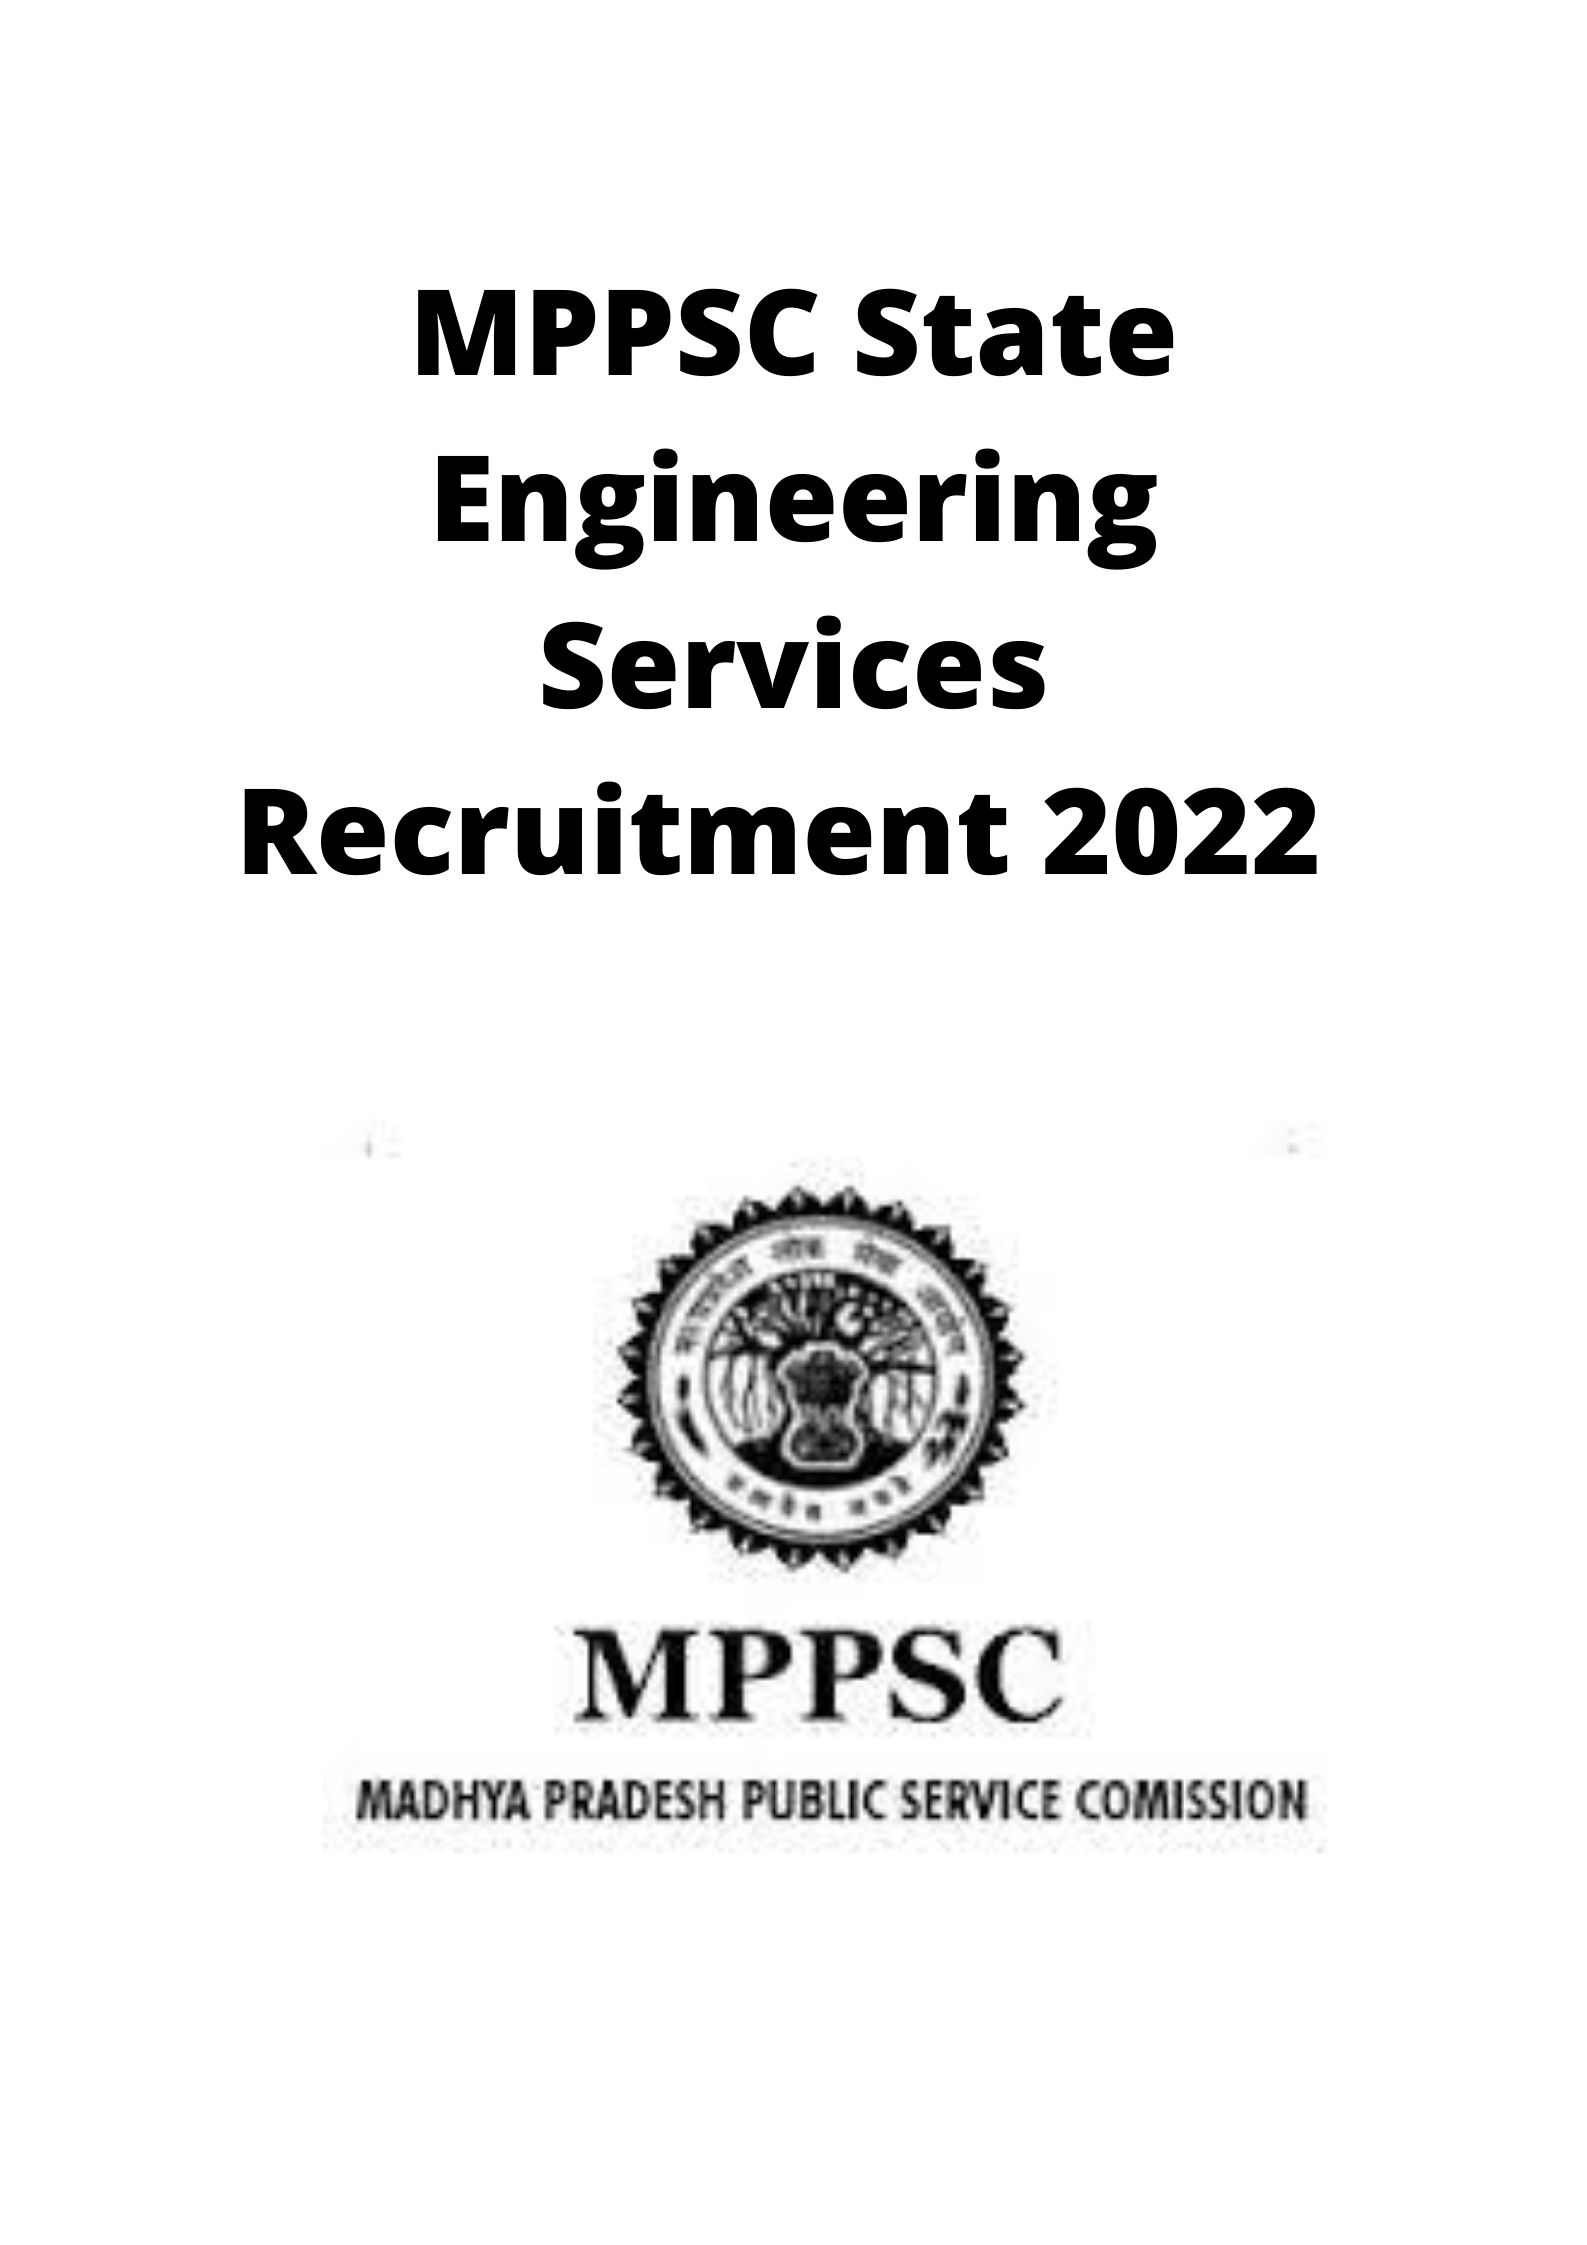 MPPSC State Engineering Services Recruitment 2022